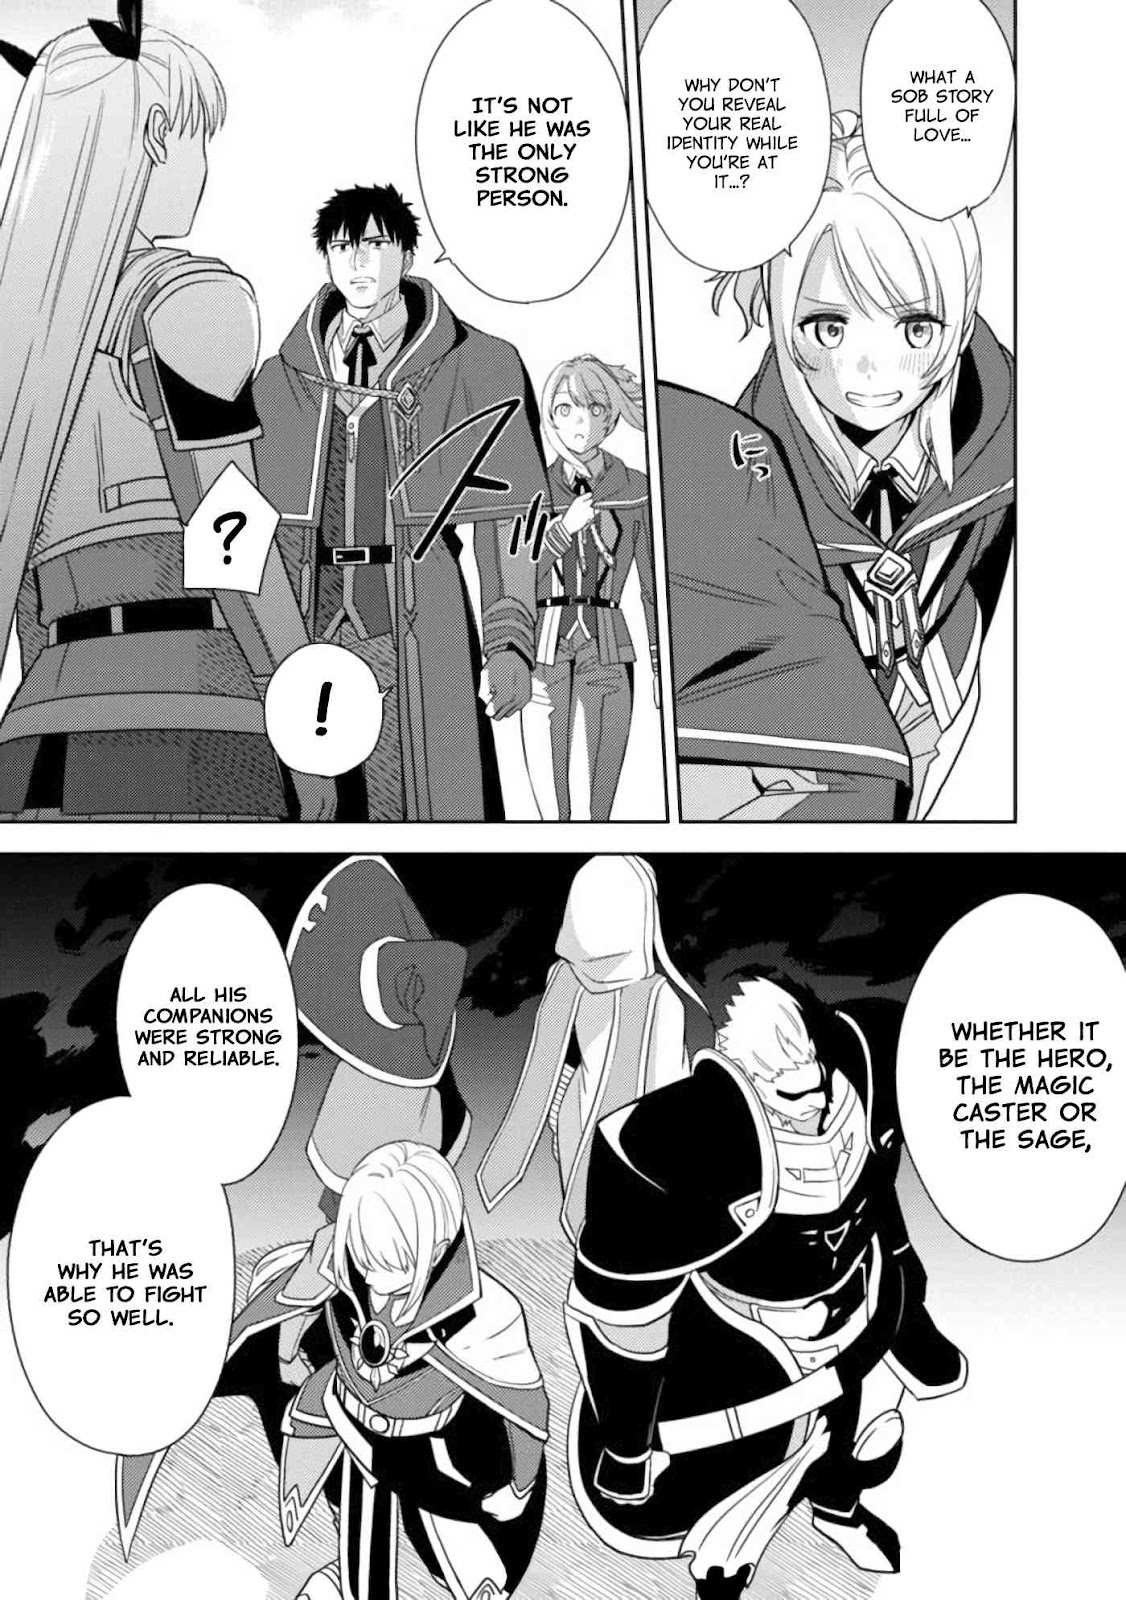 The Reincarnated Swordsman With 9999 Strength Wants To Become A Magician! Chapter 2 #38